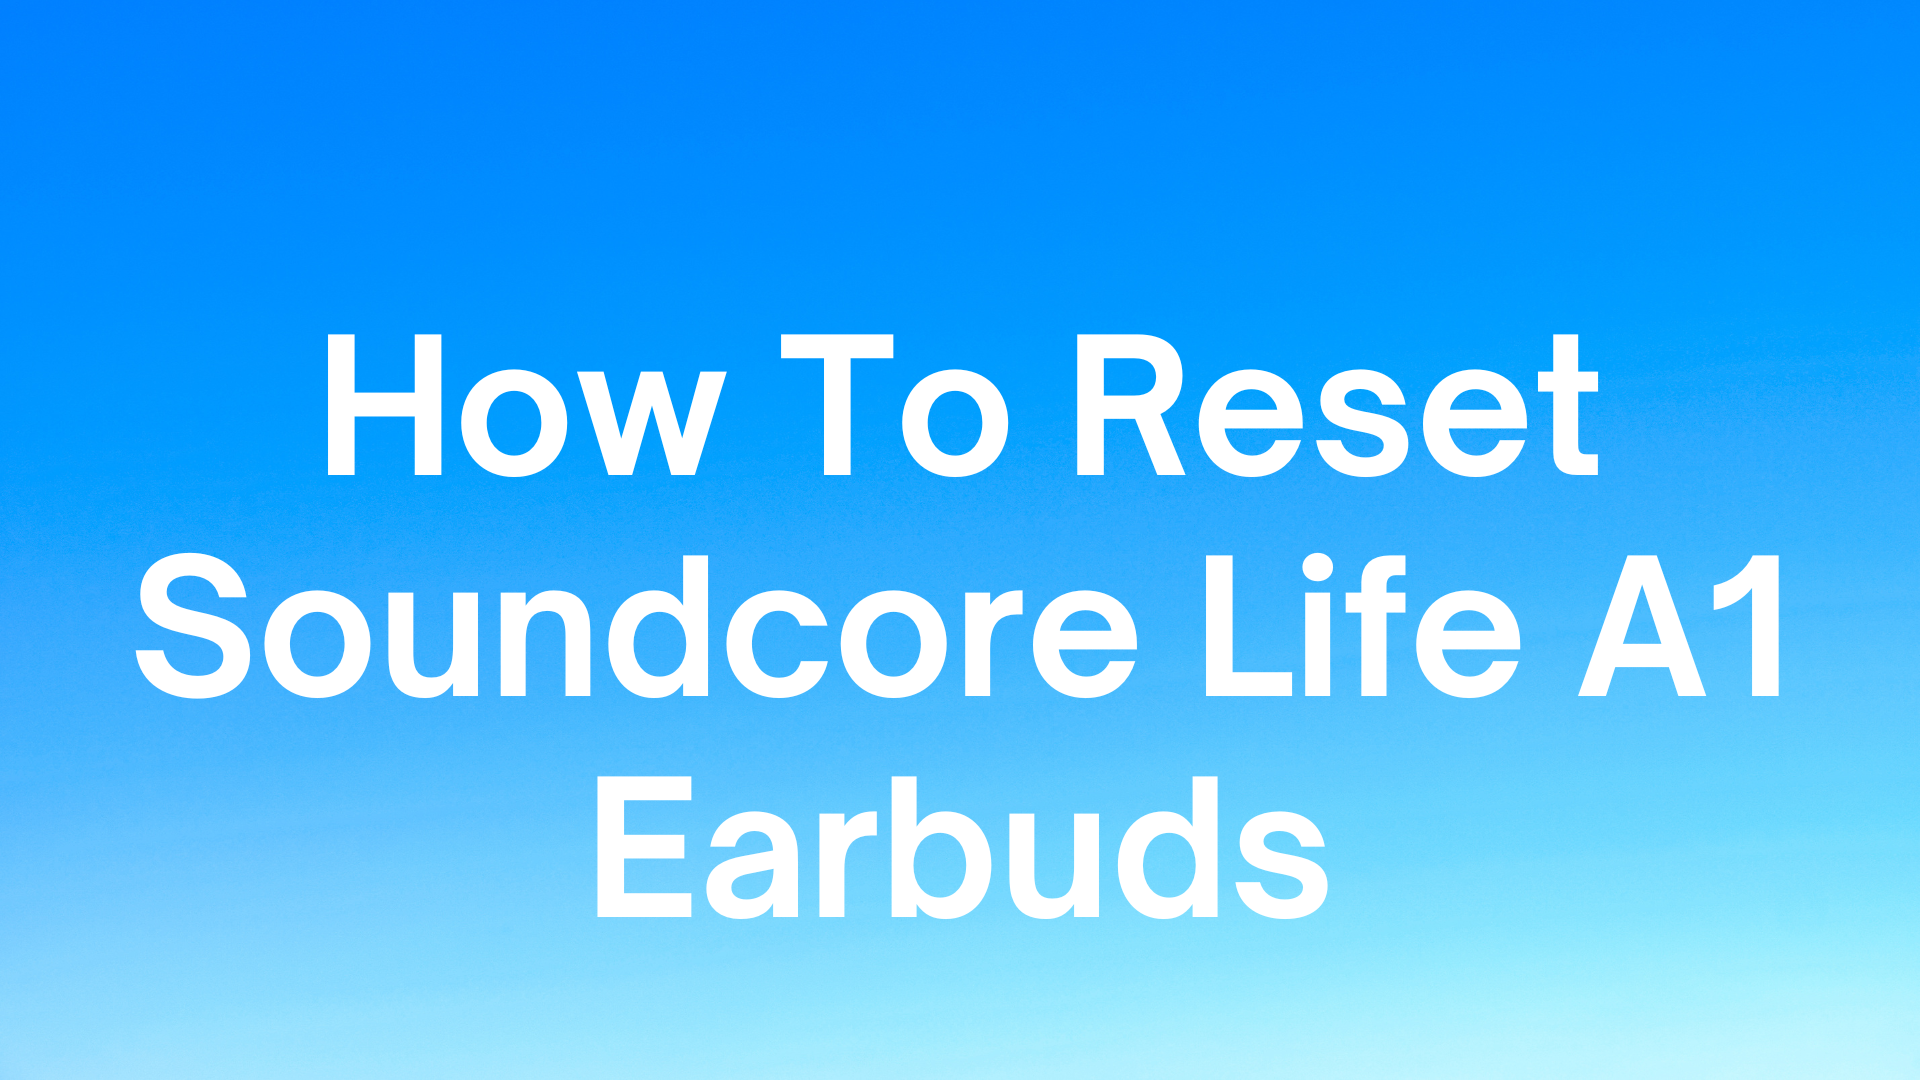 How To Reset Soundcore Life A1 Earbuds